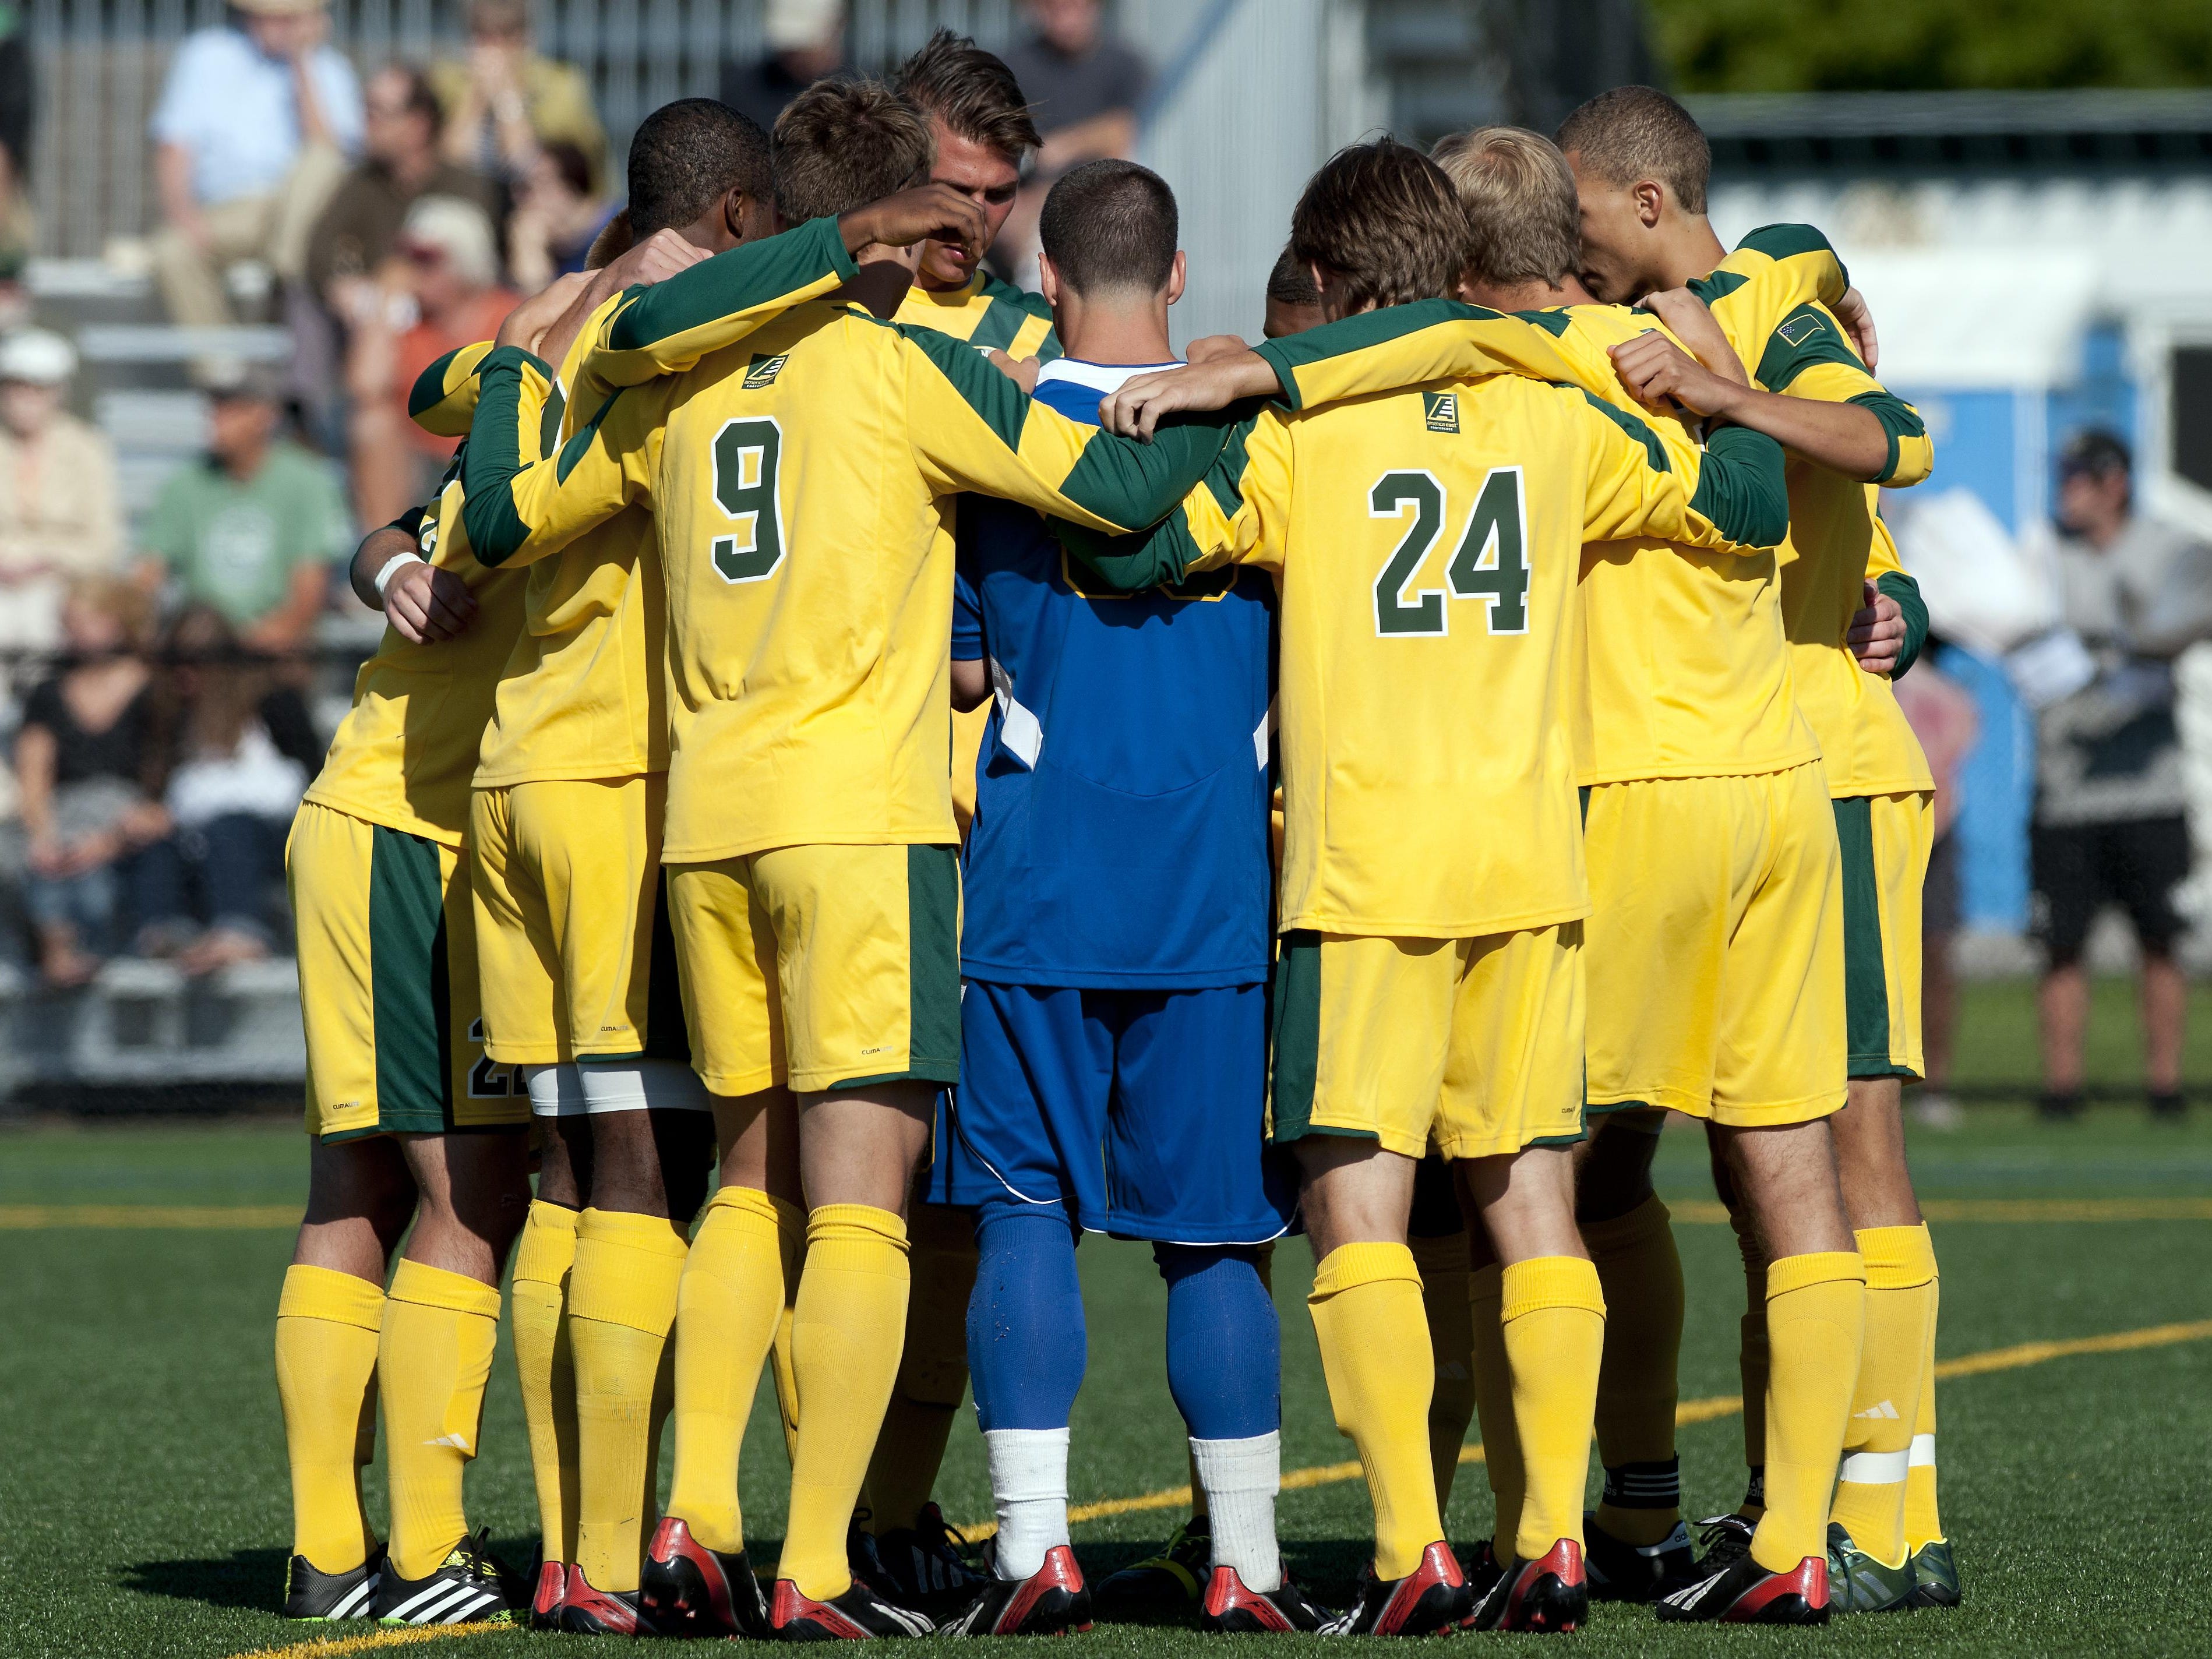 The Catamounts huddle together before the start of the men's soccer game between the Colgate Raiders and the Vermont Catamounts at Virtue field on Friday afternoon September 6, 2013 in Burlington, Vermont. (BRIAN JENKINS, for the Free Press)